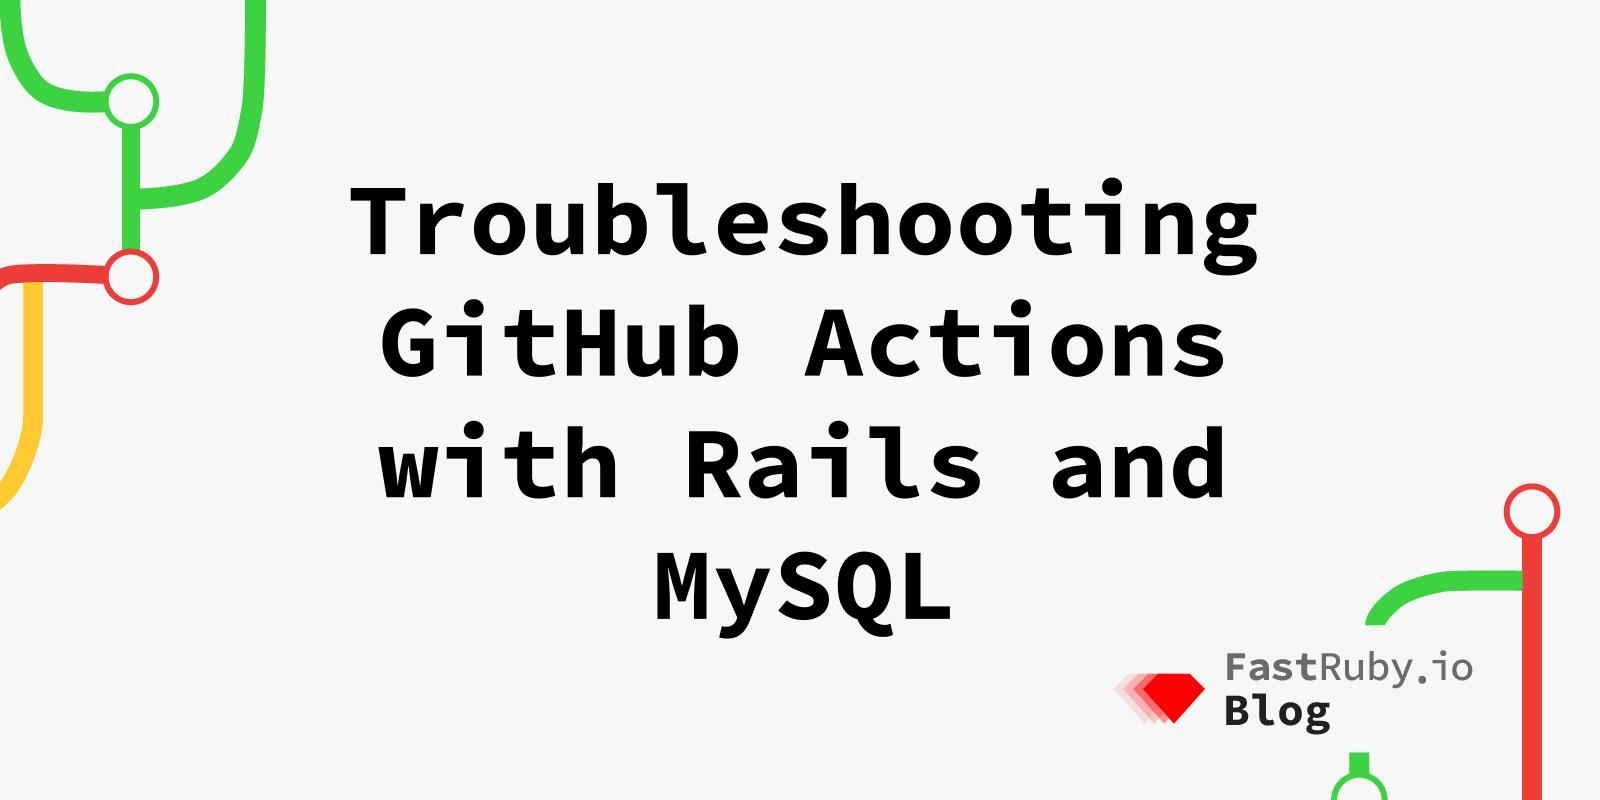 Troubleshooting GitHub Actions with Rails and MySQL